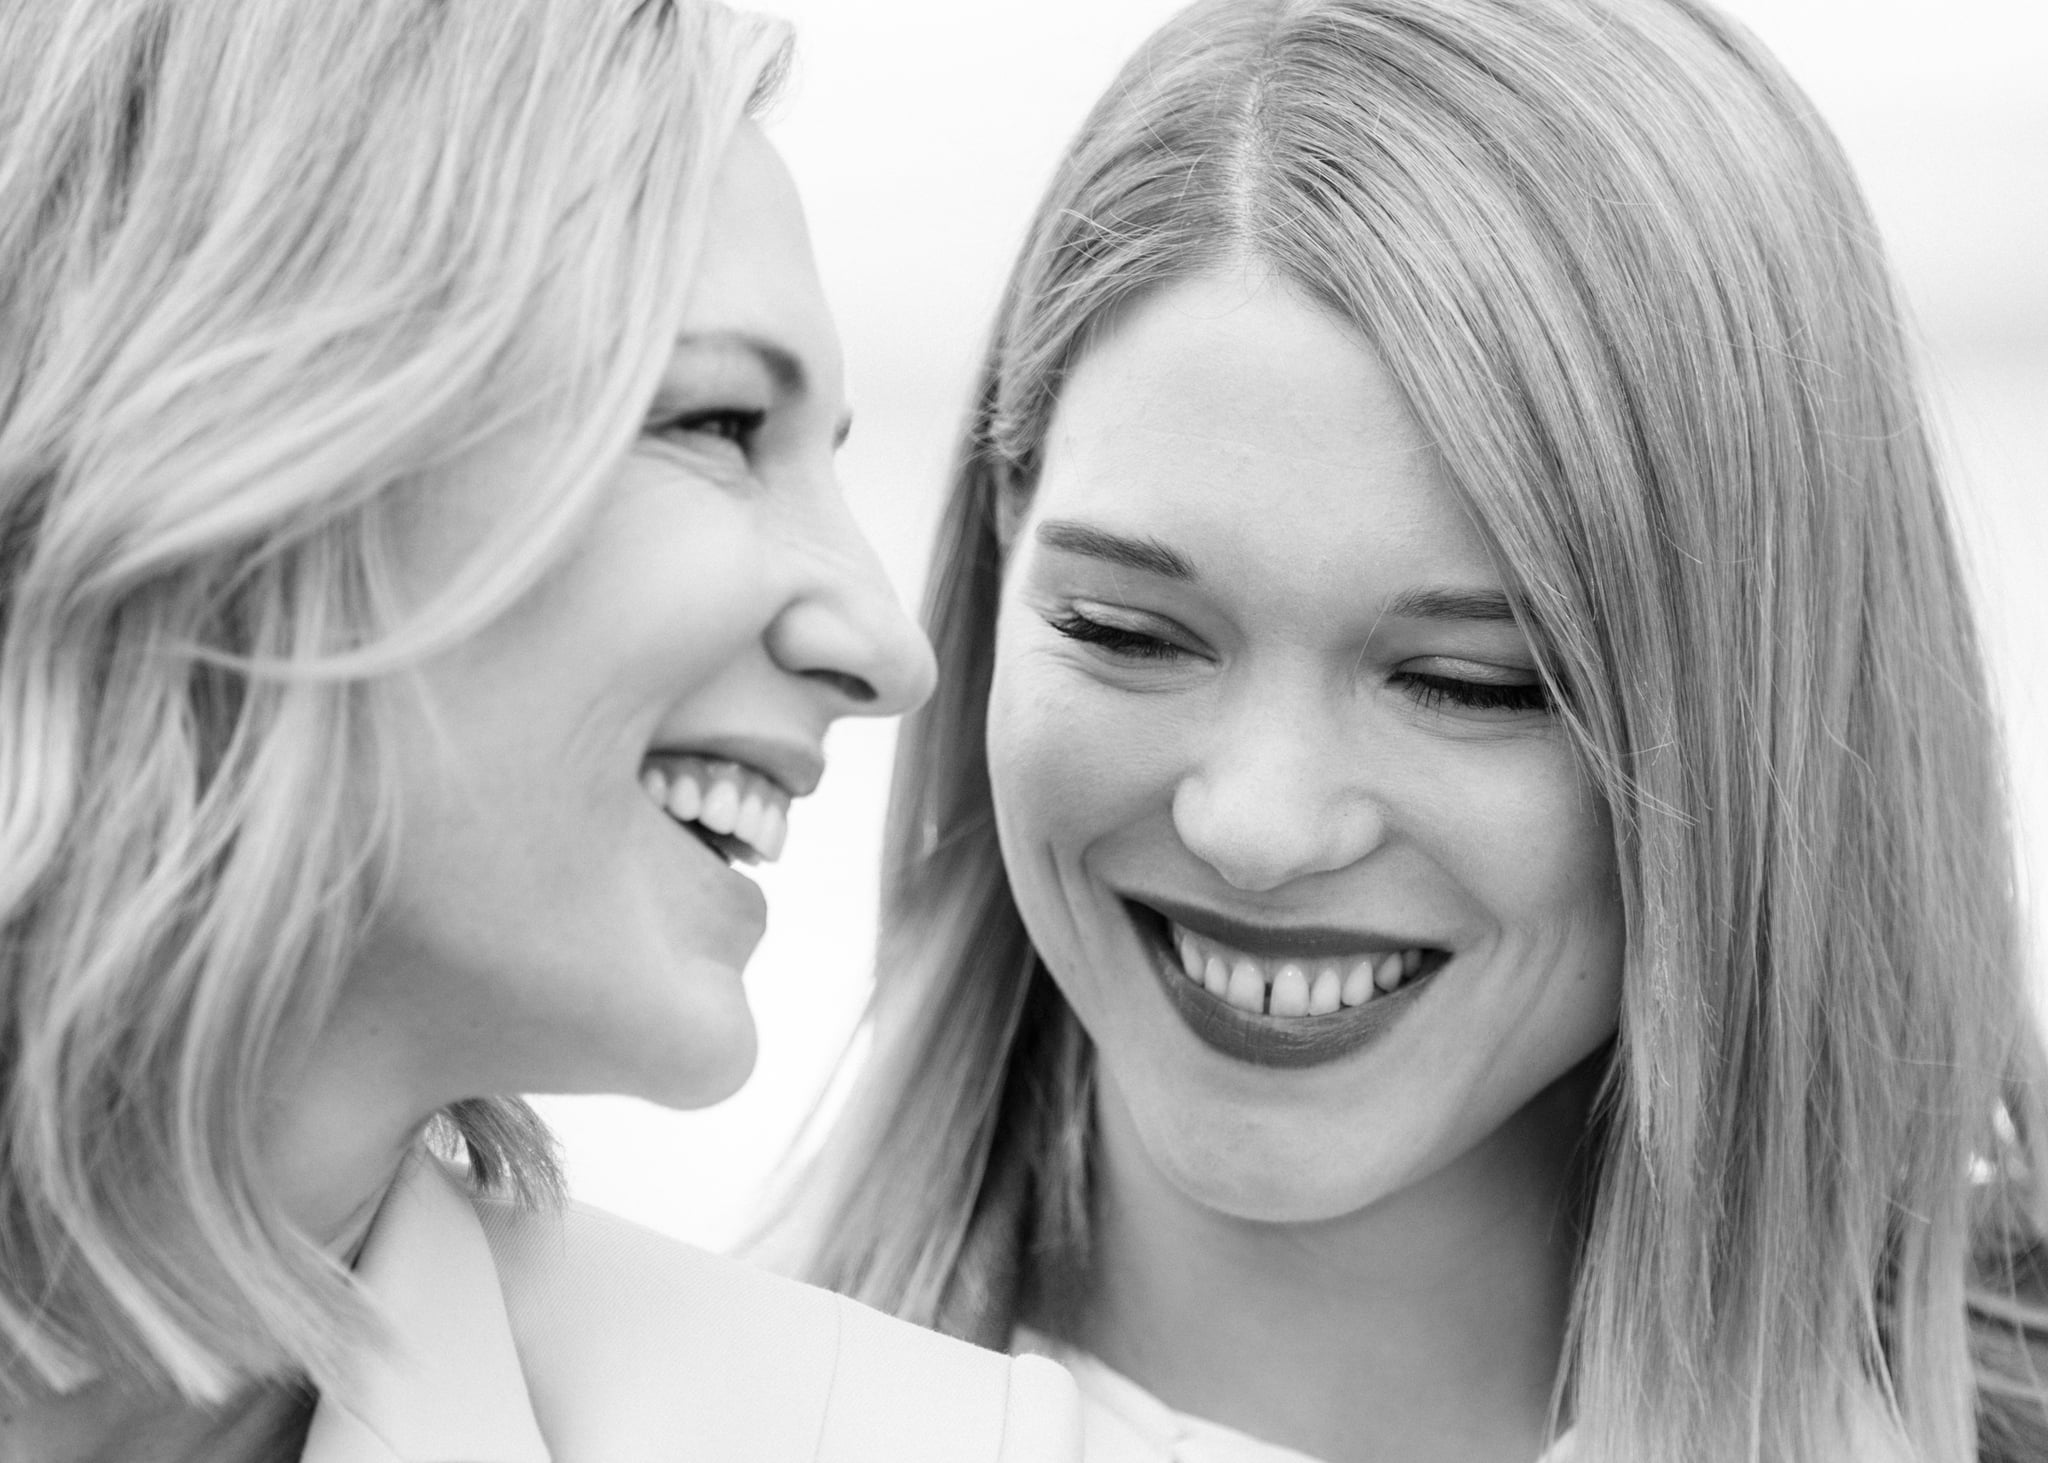 Pictured: Lea Seydoux, These Stunning Black and White Cannes Film Festival  Photos Look Like an Ad Campaign